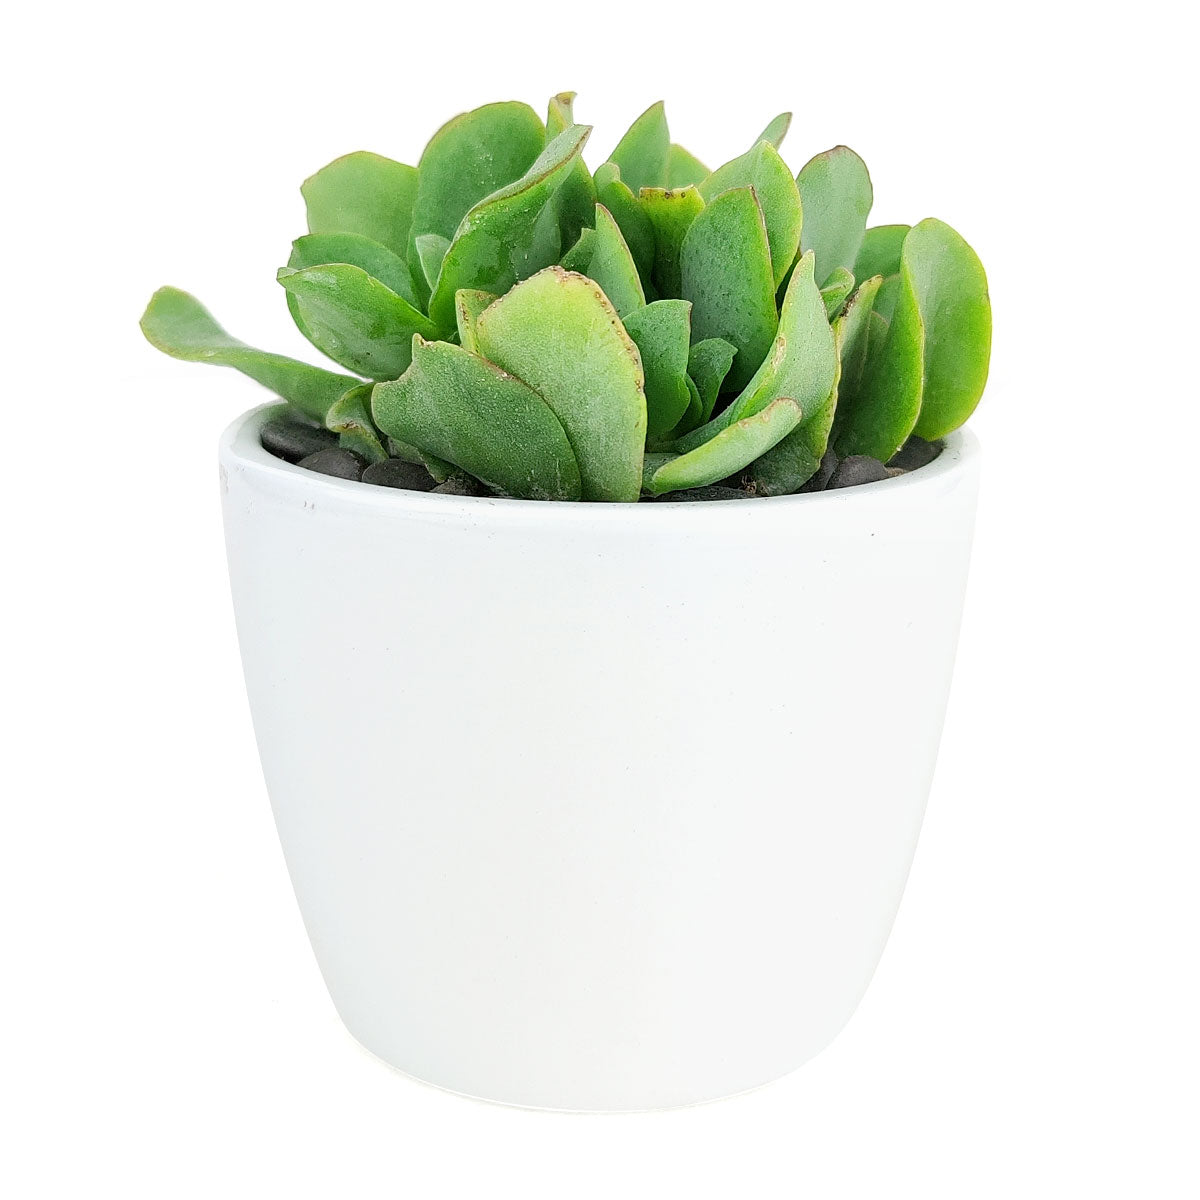 Simple Ceramic Pot for sale, White Cactus Ceramic Pot, Modern Pot Decor for Home or Office, High Quality Ceramic Pot for Plants and Flowers, Modern Style Indoor Ceramic Planter